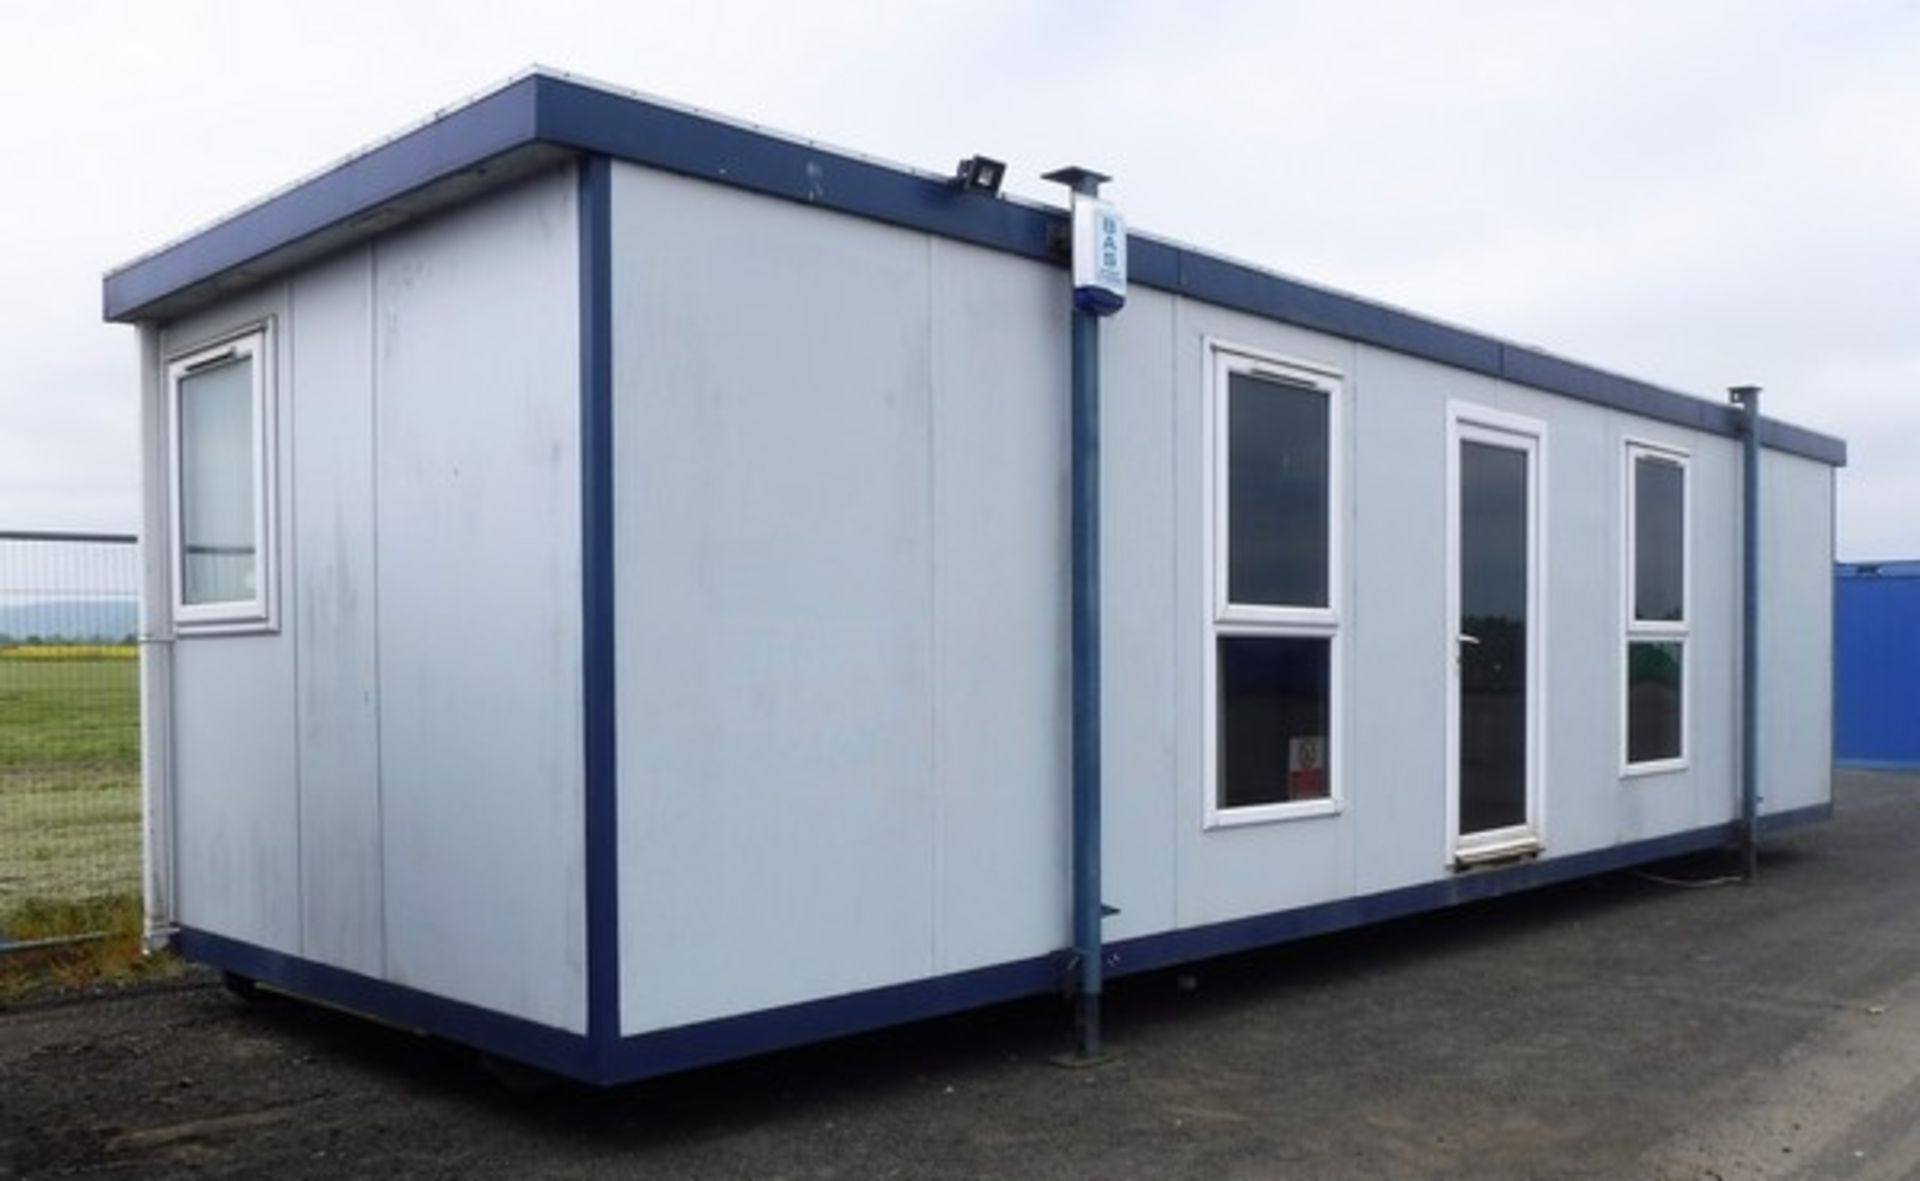 2007 PORTABLE BUILDING. 10m x 3.1m with toilet & kitchen. Double glazed, alarm fitted, insulated. - Image 6 of 12